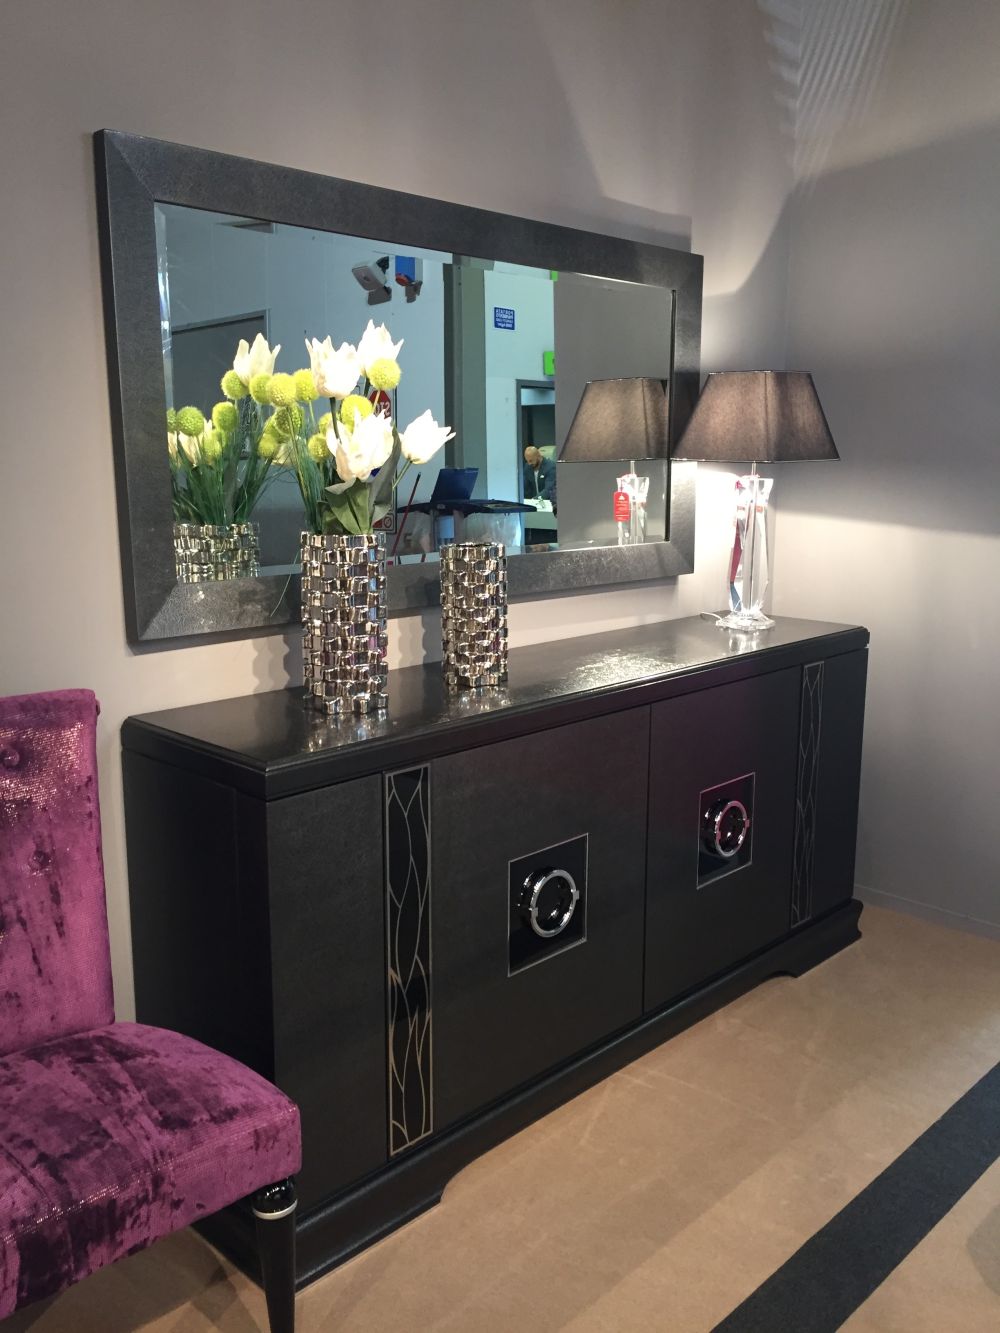 Rectangular decorative mirror above the entryway sideboard and decorated with fresh flowers